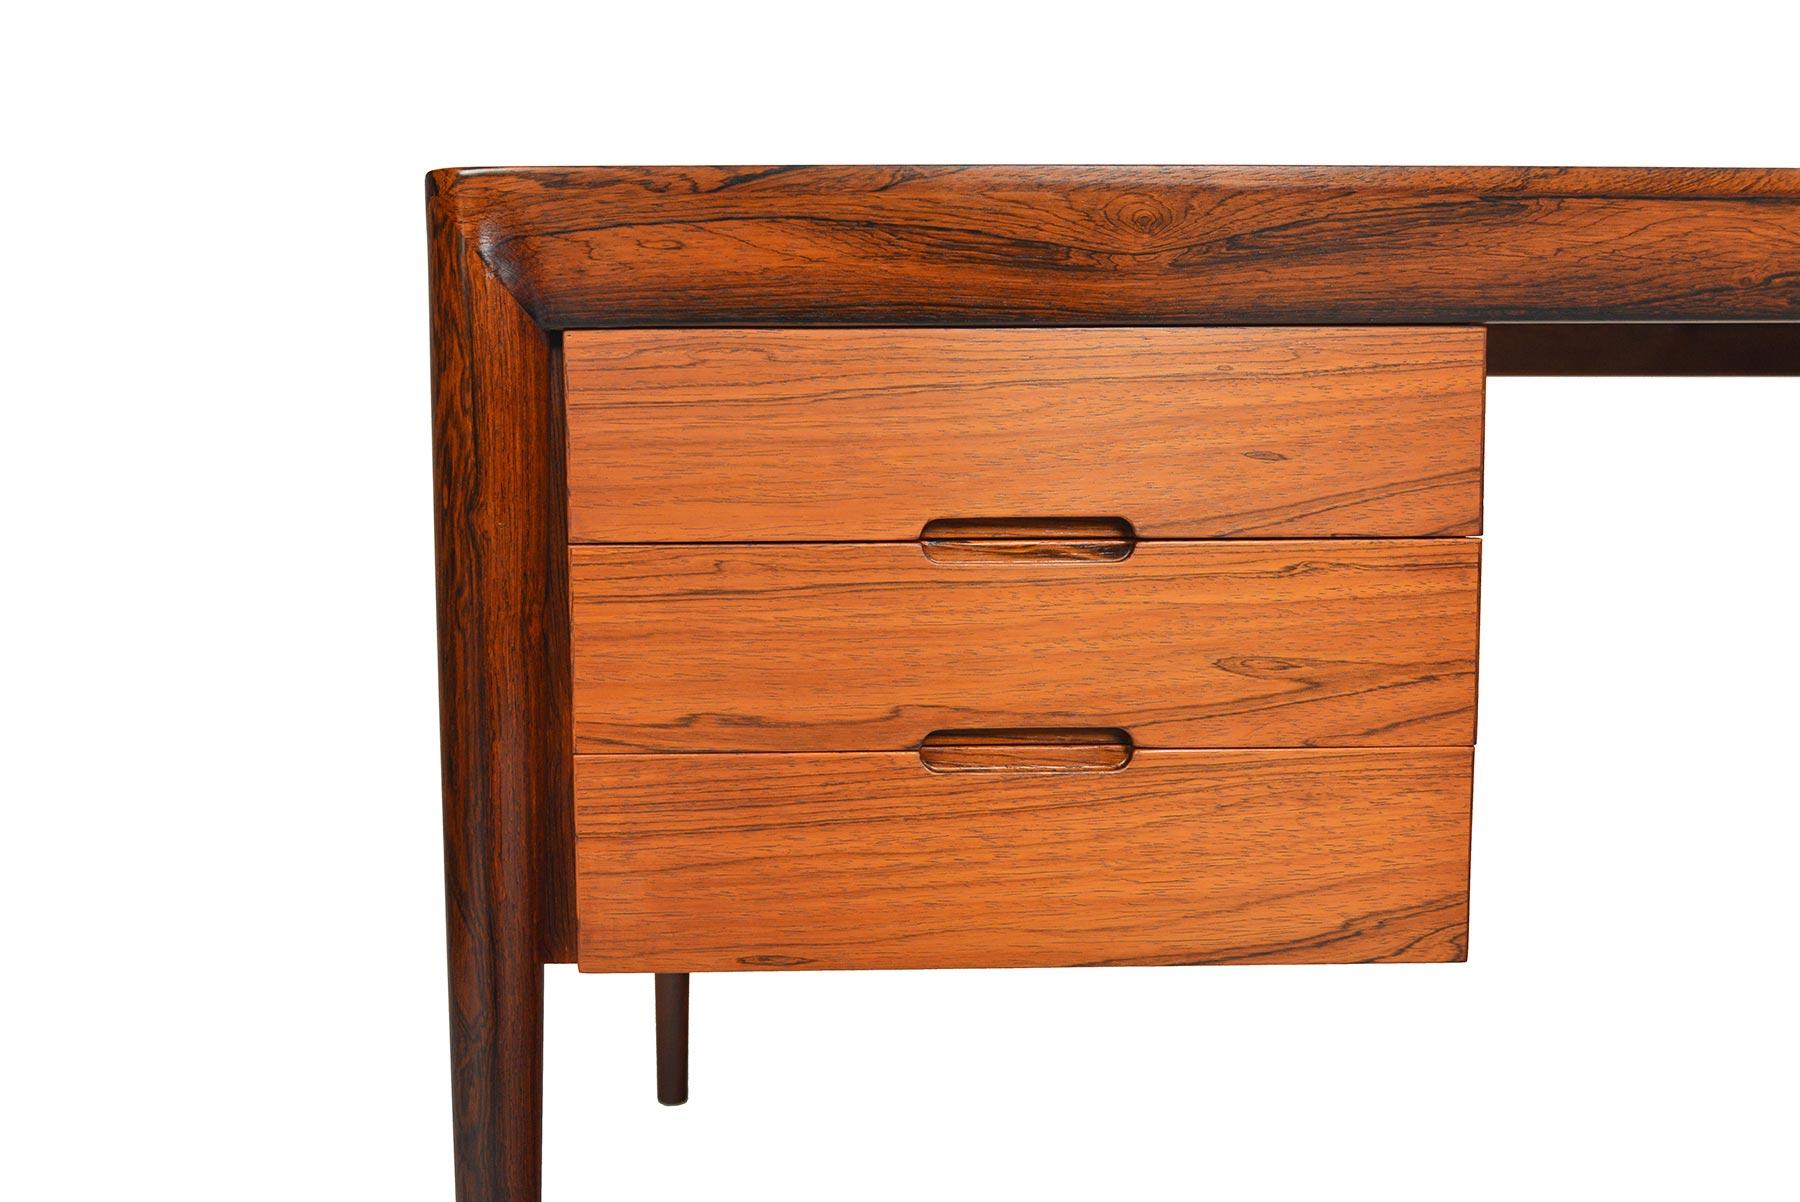 This rare Danish modern executive desk was designed by Erik Riisager Hansen for Haslev Møbelsnedkeri in the 1960s. The beautiful banding seamlessly joins to the exterior mounted legs. Crafted in Brazilian rosewood, the top slab features a raised lip